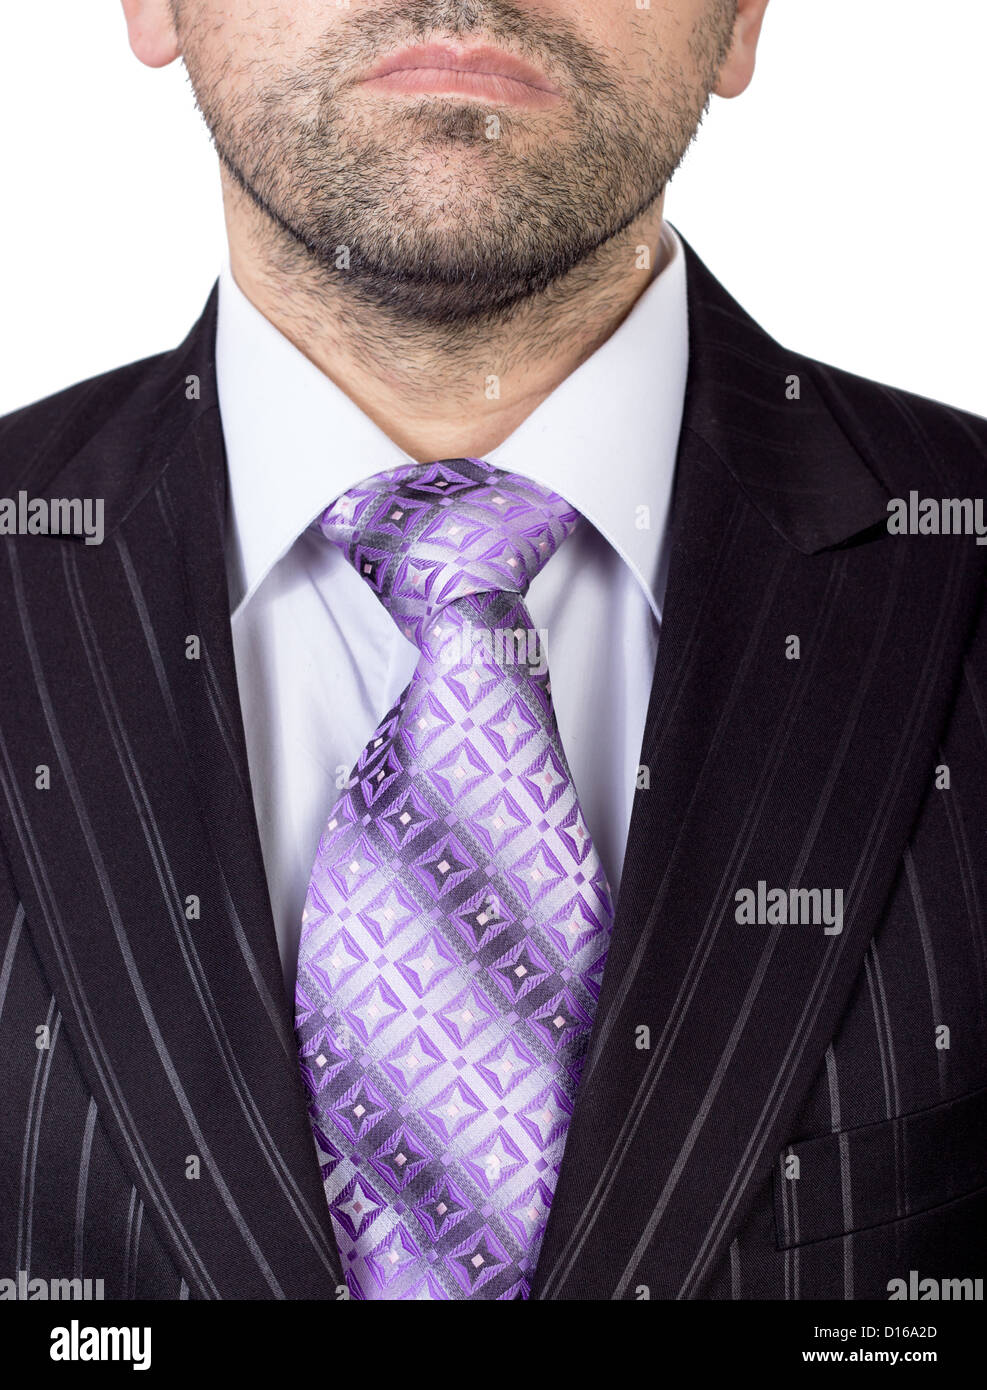 Closeup portrait of businessman in white collar shirt and suit with tie. Stock Photo